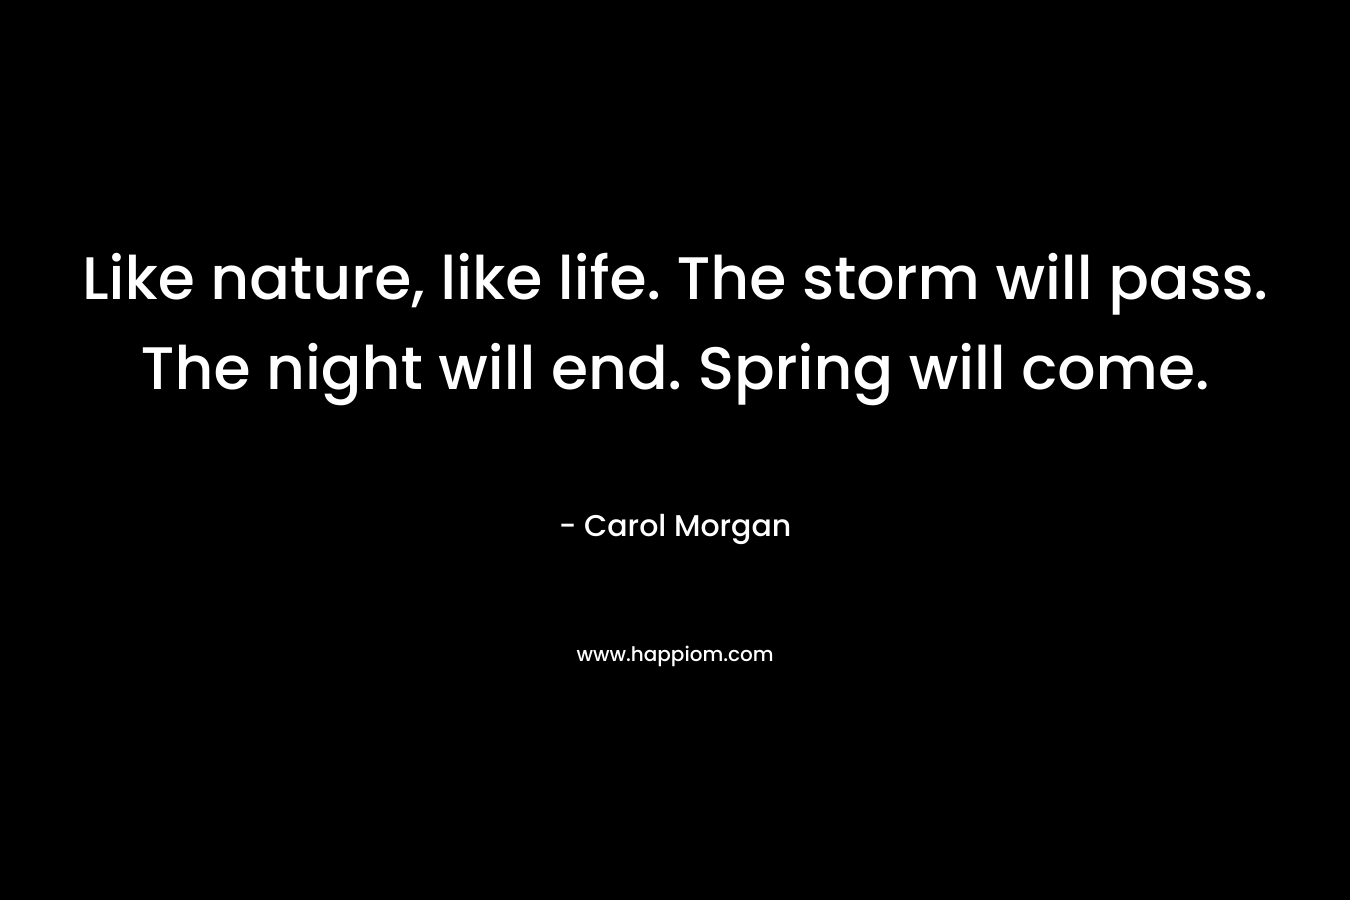 Like nature, like life. The storm will pass. The night will end. Spring will come.